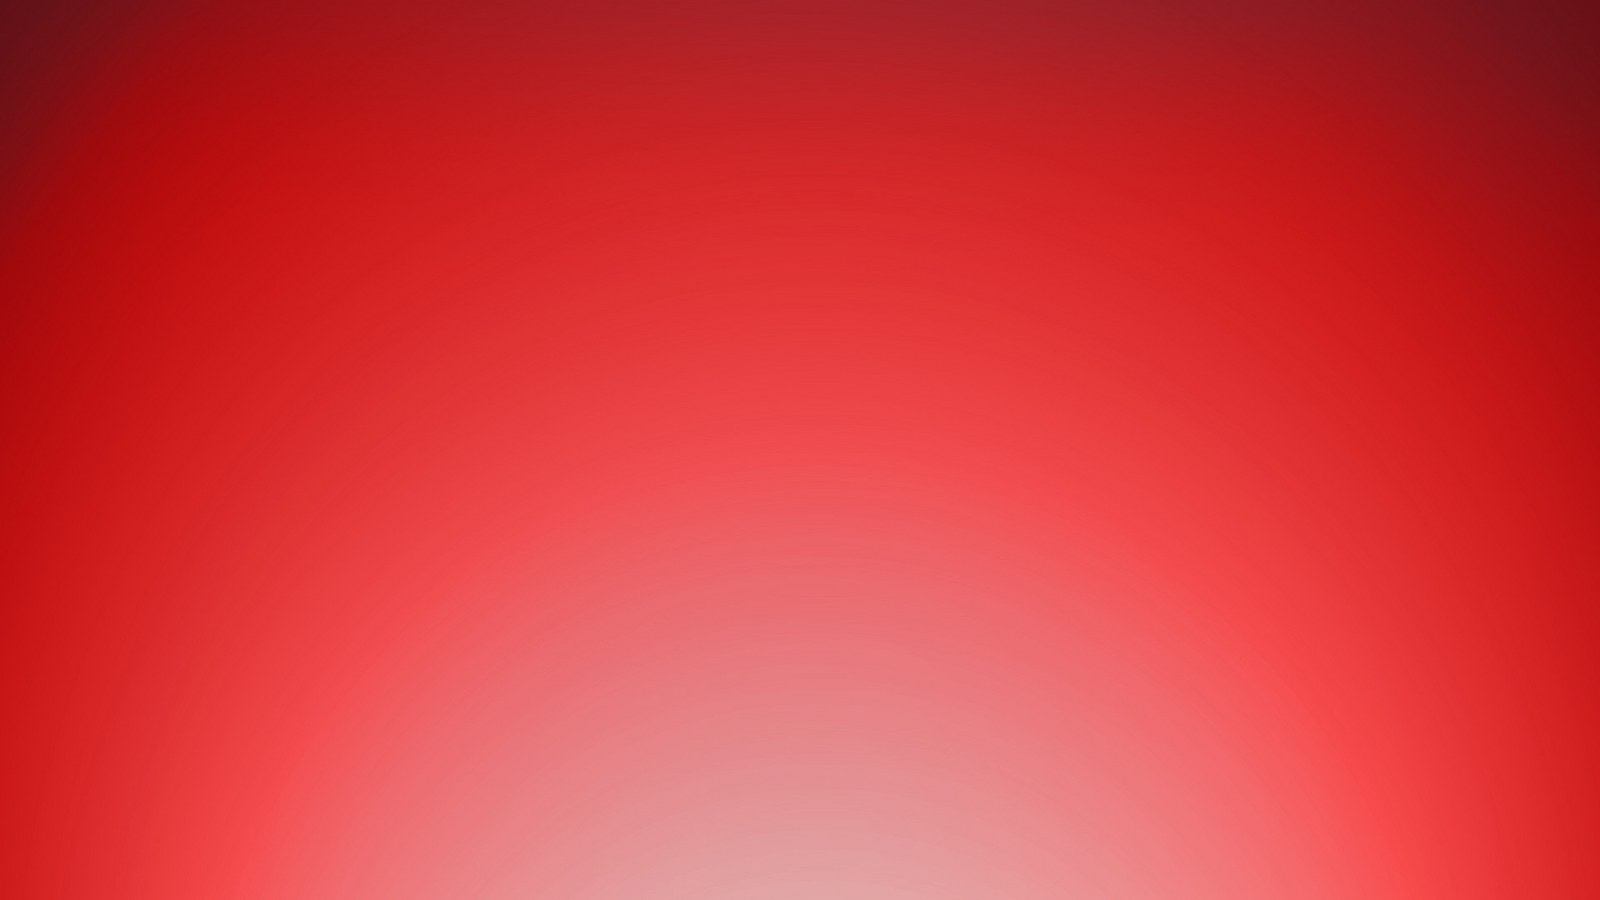 Red Textured Background Pc Android iPhone And iPad Wallpaper